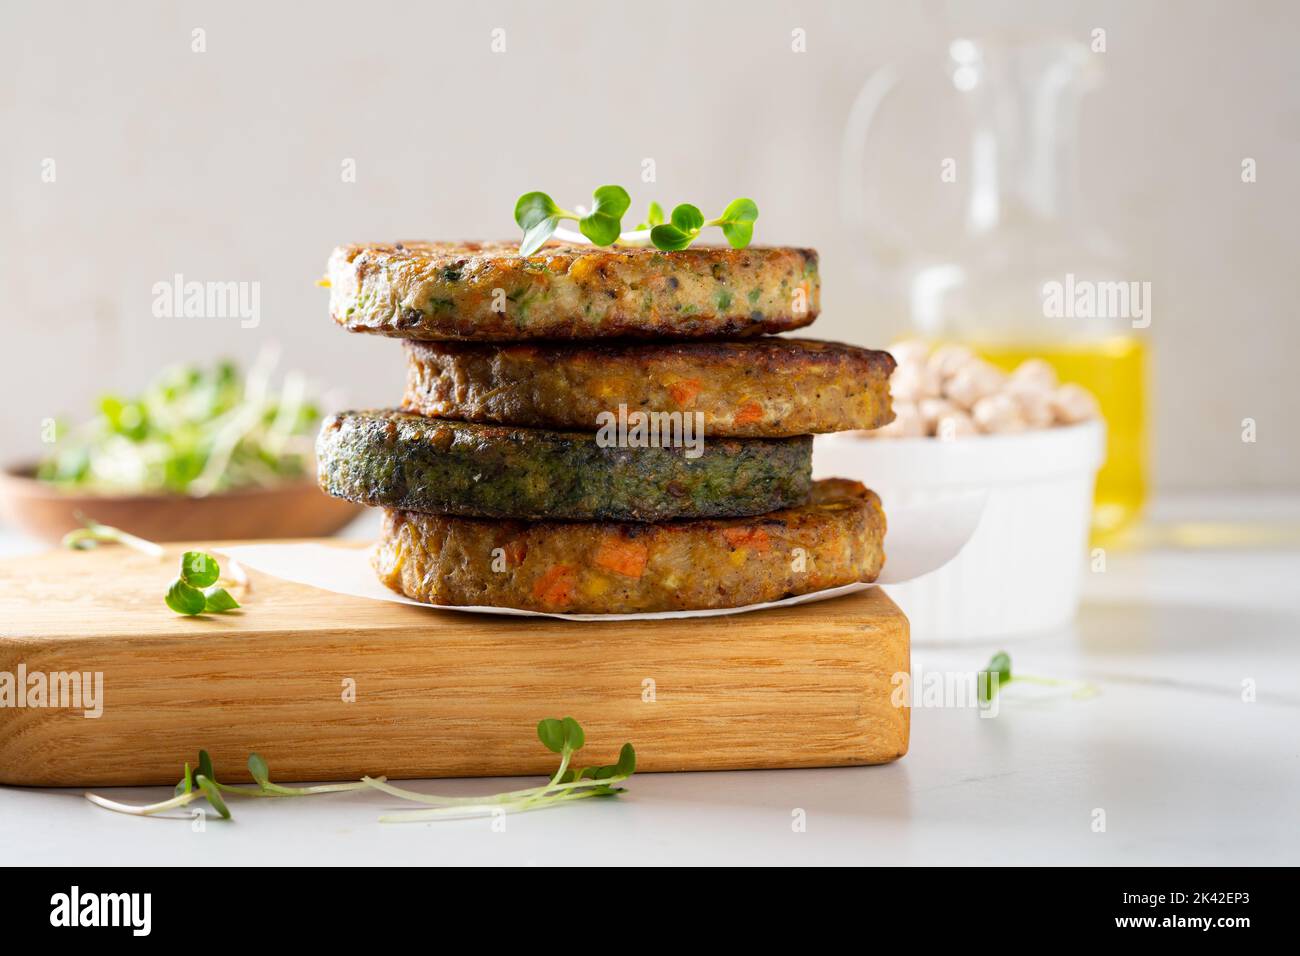 Healthy vegan food fritters with vegetables and grains gluten free Stock Photo